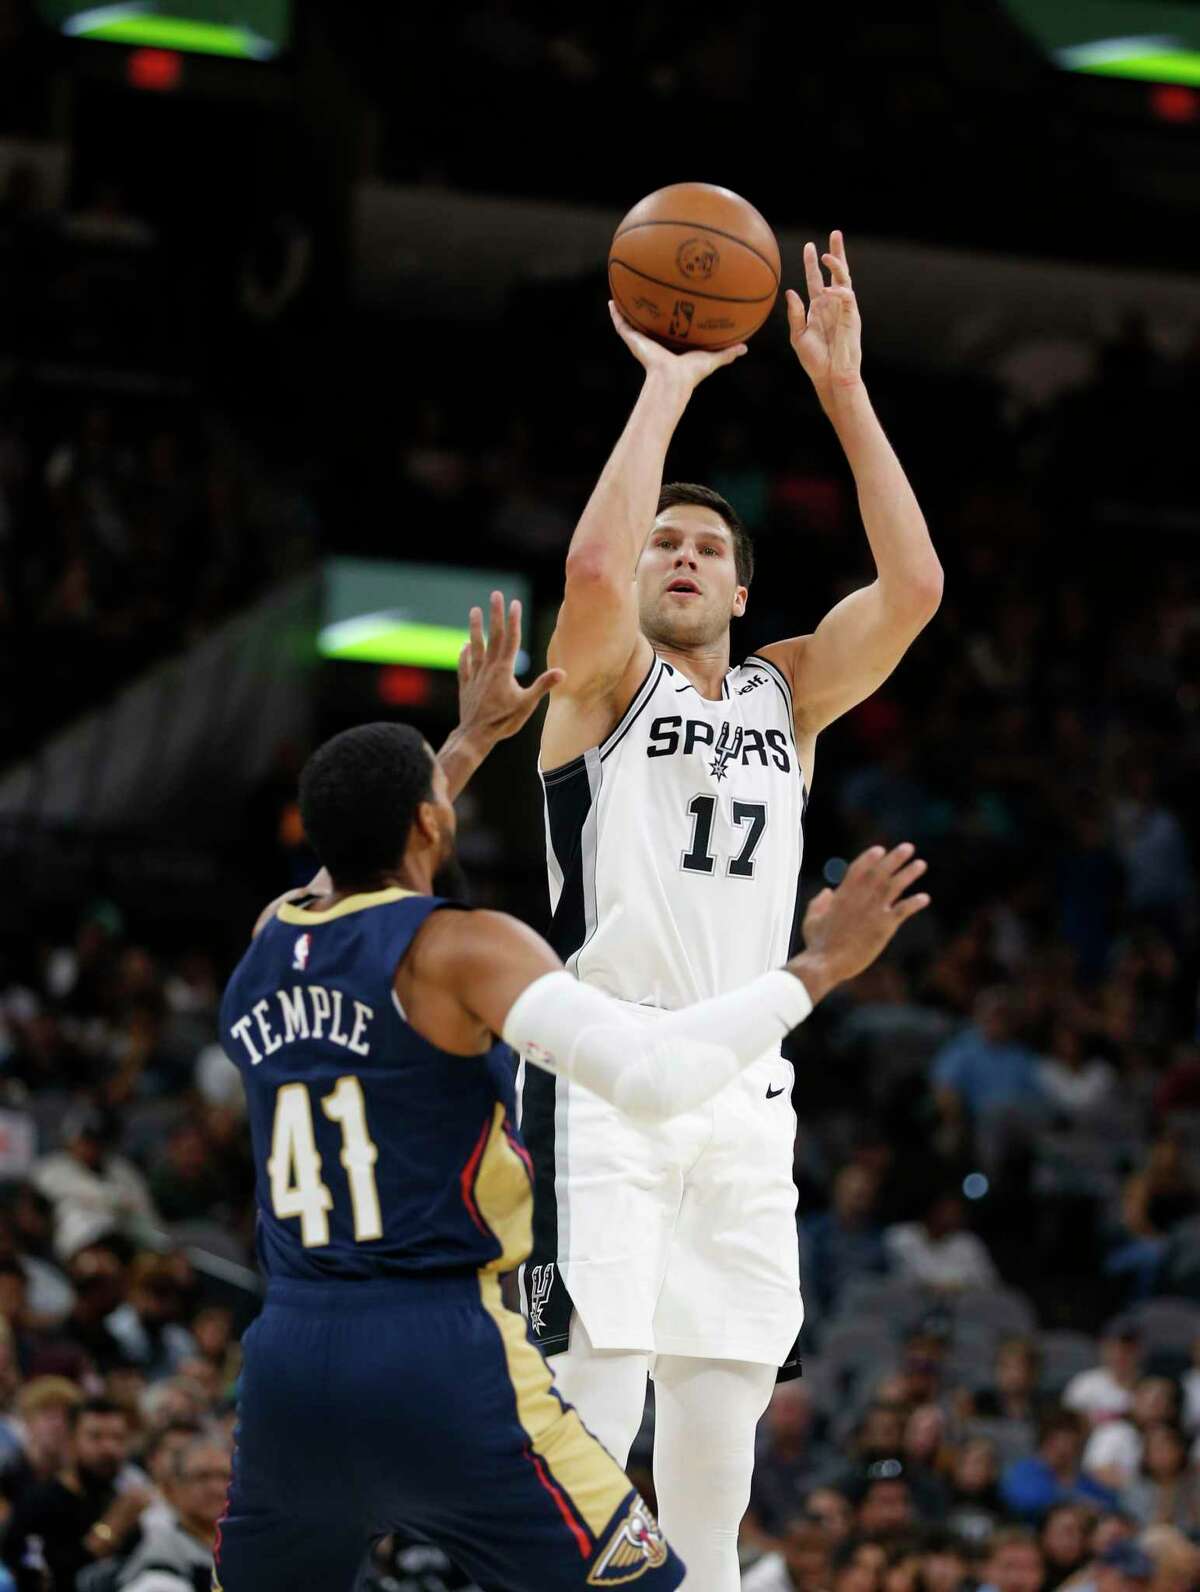 Doug McDermott will come off the bench for the Spurs this season after starting 51 games last season.